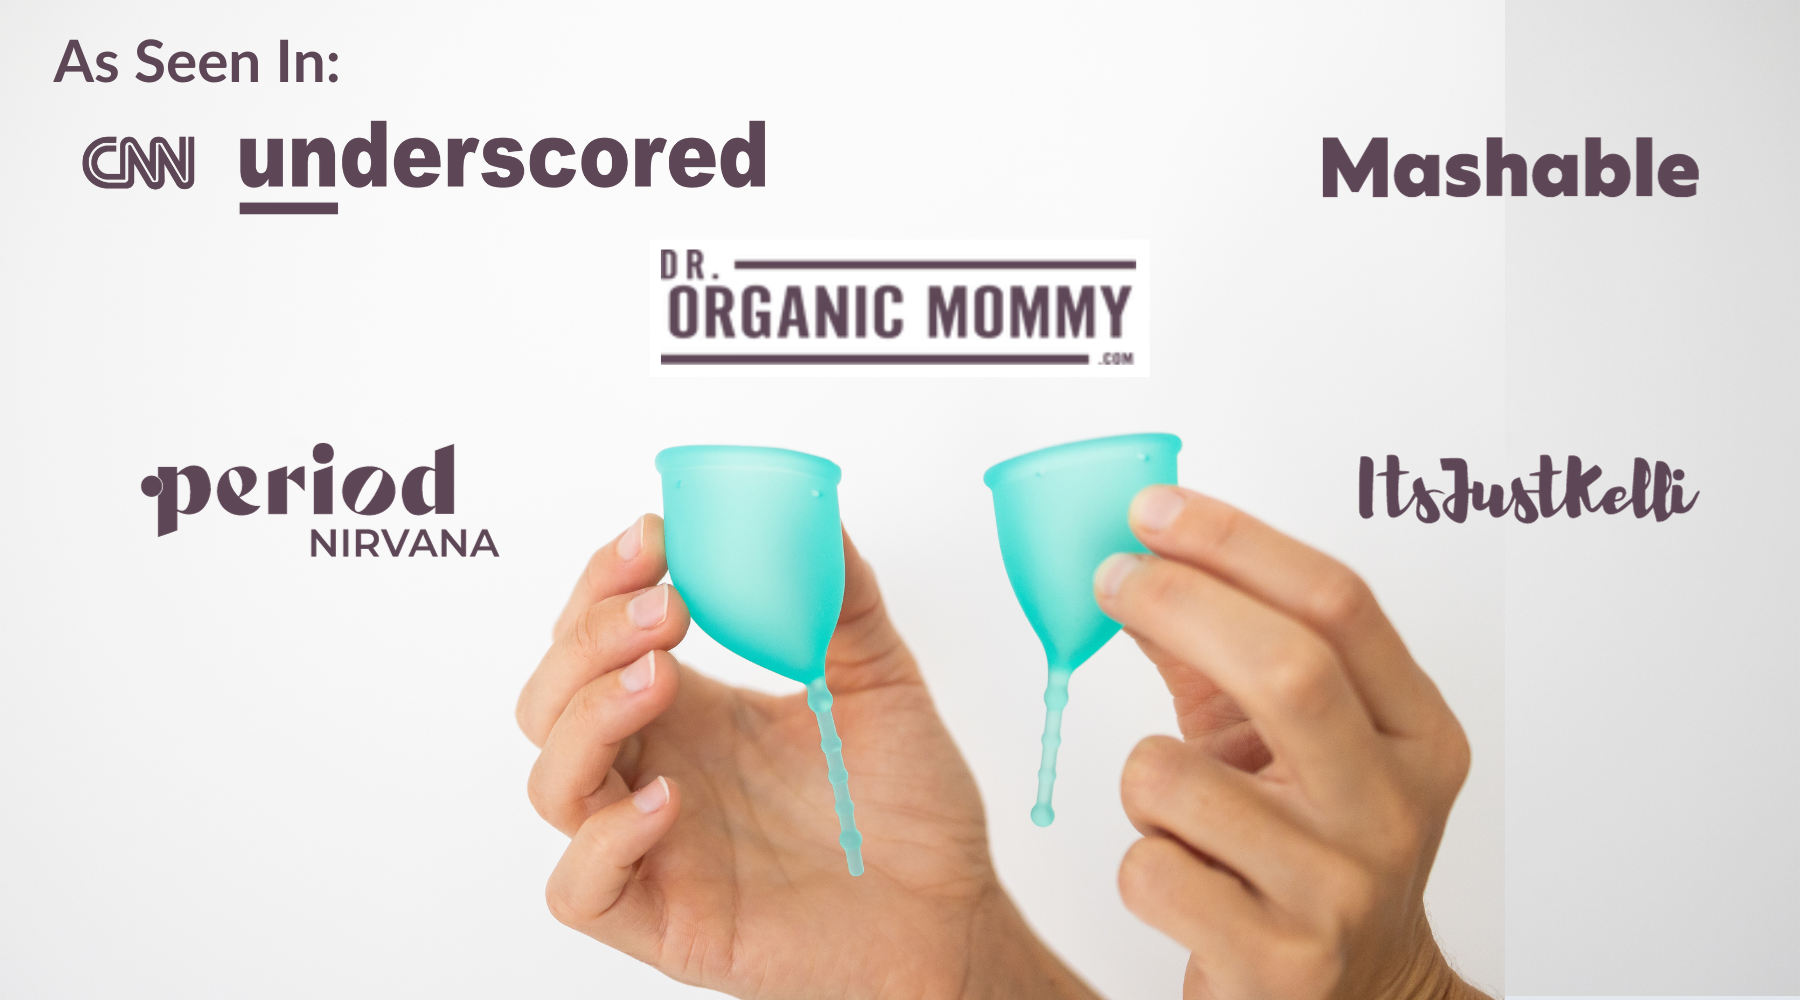 Kind Cup menstrual cup As Seen In: CNN Underscored; Dr. Organic Mommy; Mashable; Period Nirvana; its just kelli. Photo of hands holding ergonomic period cup Kind Cup